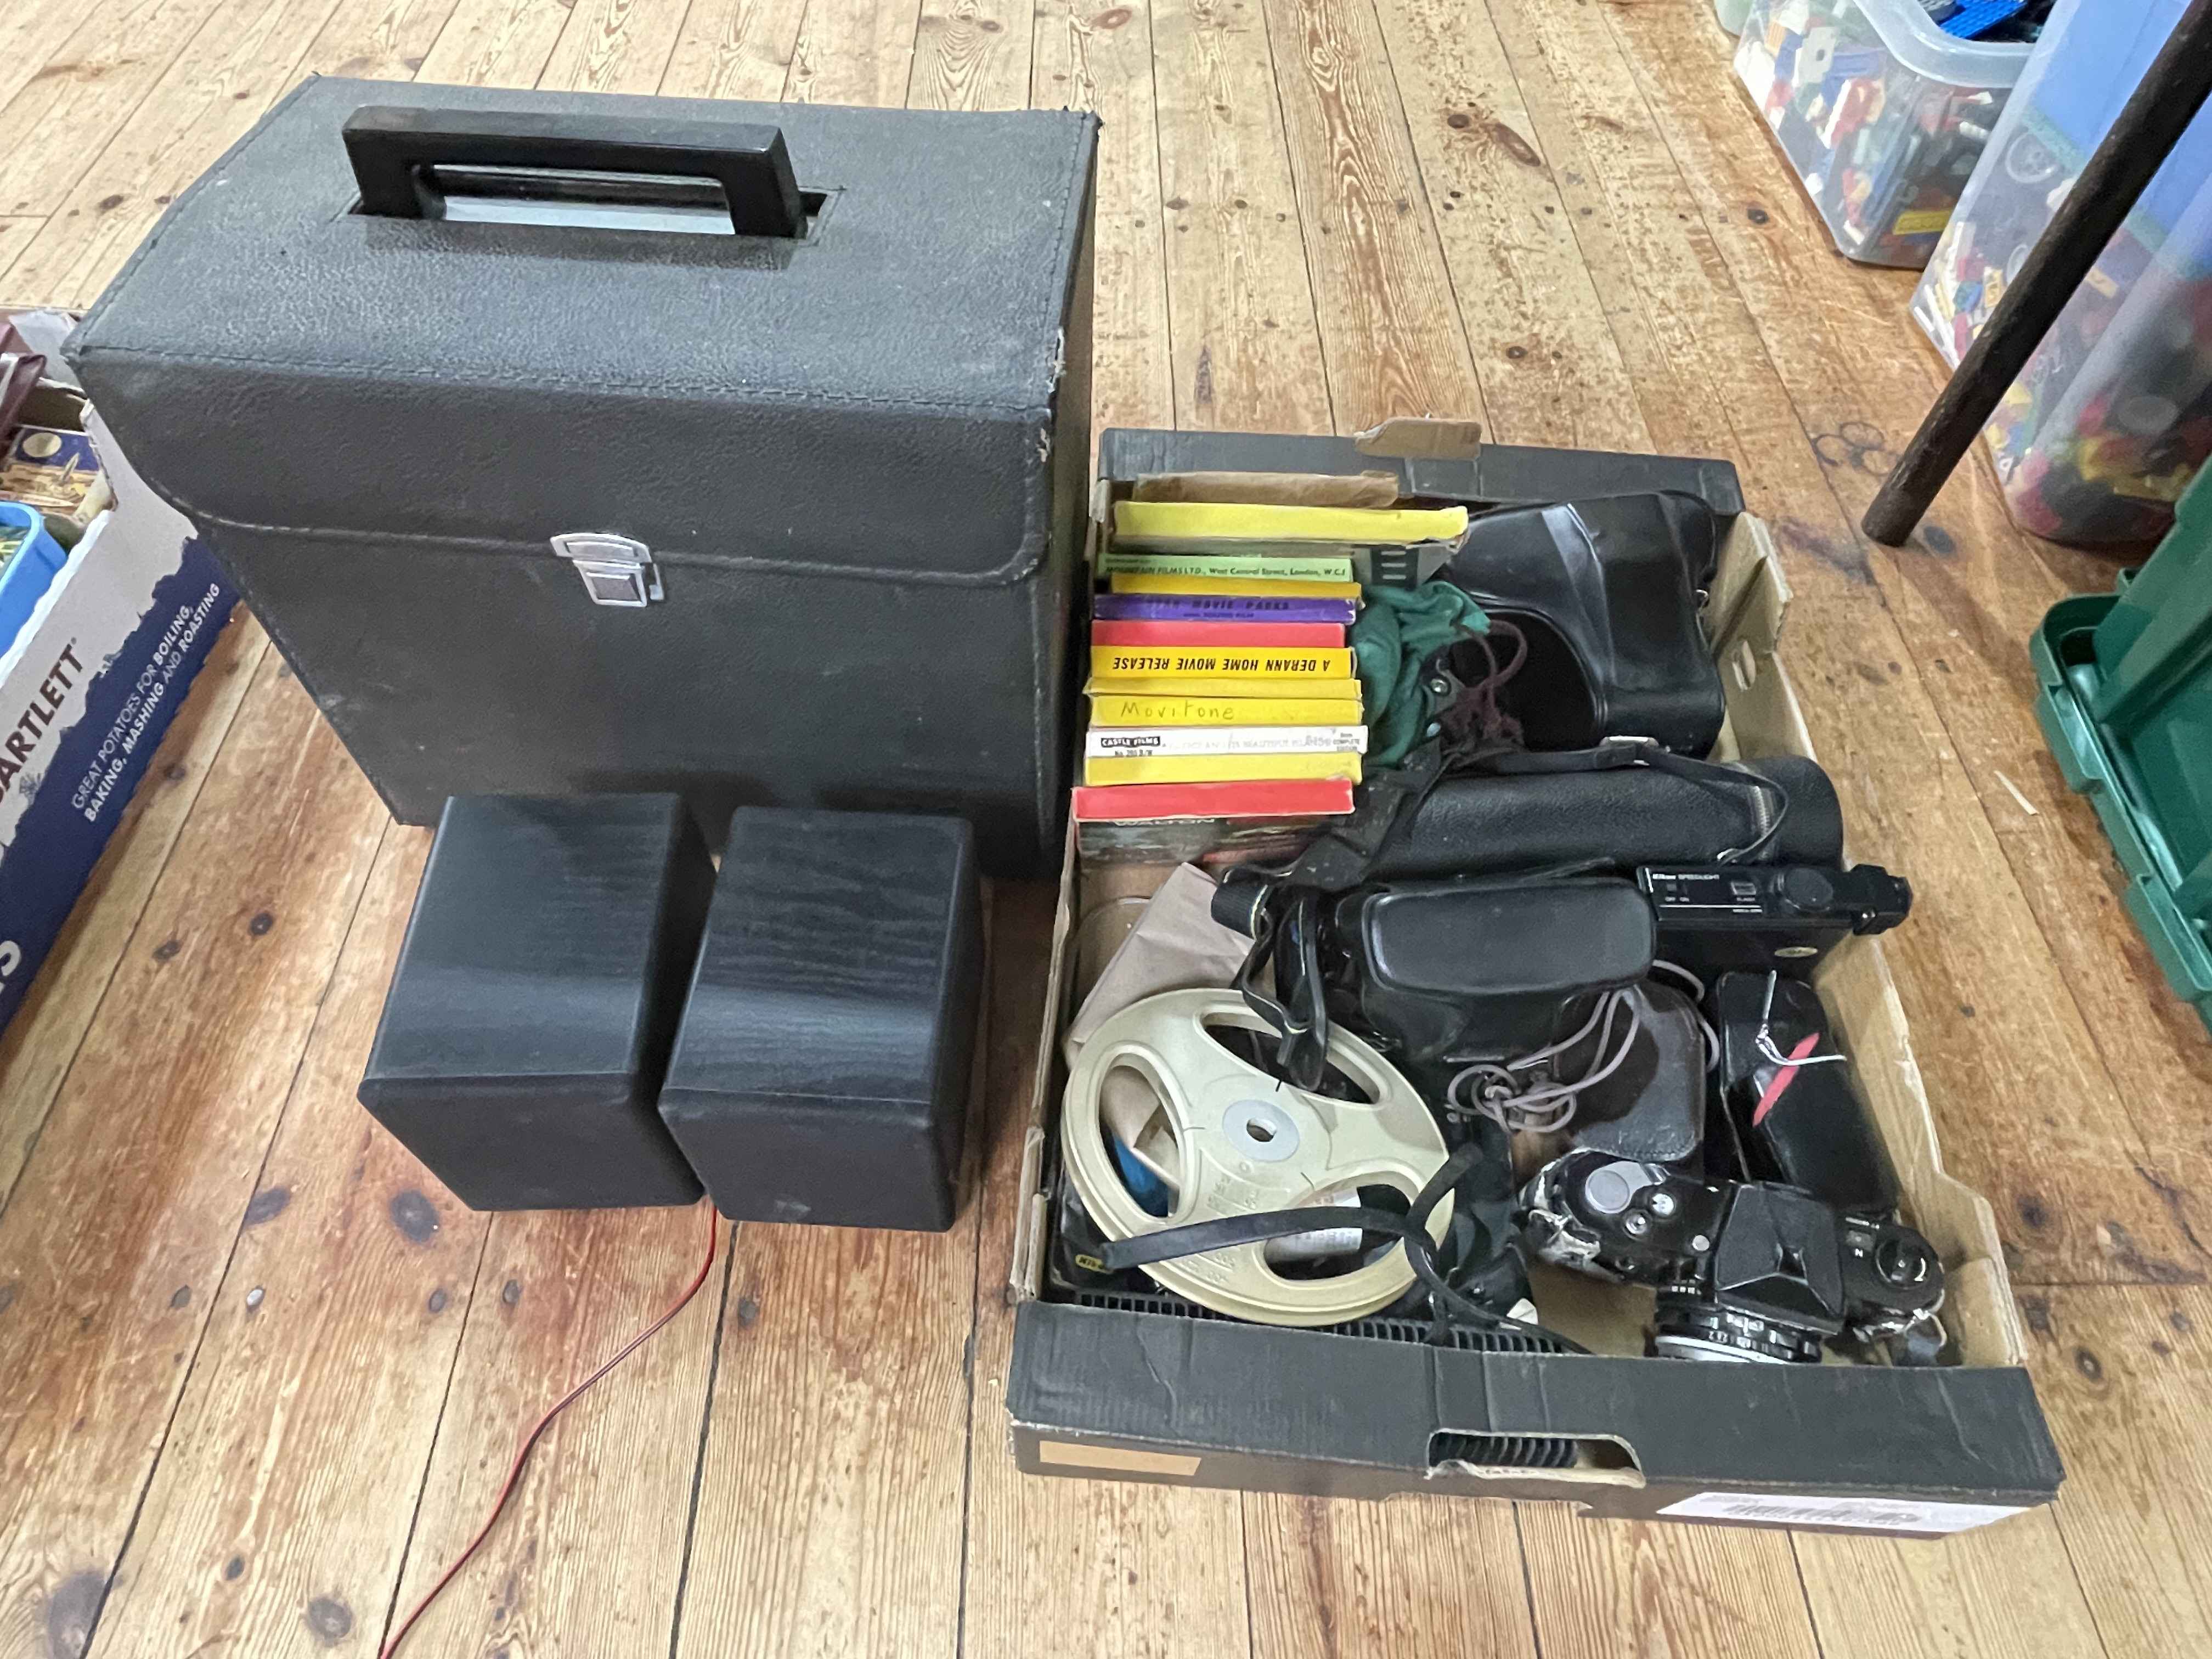 Elmo ST-1200 sound projector, two Nikon cameras with lenses, 90-230 zoom lens, Konica camera,